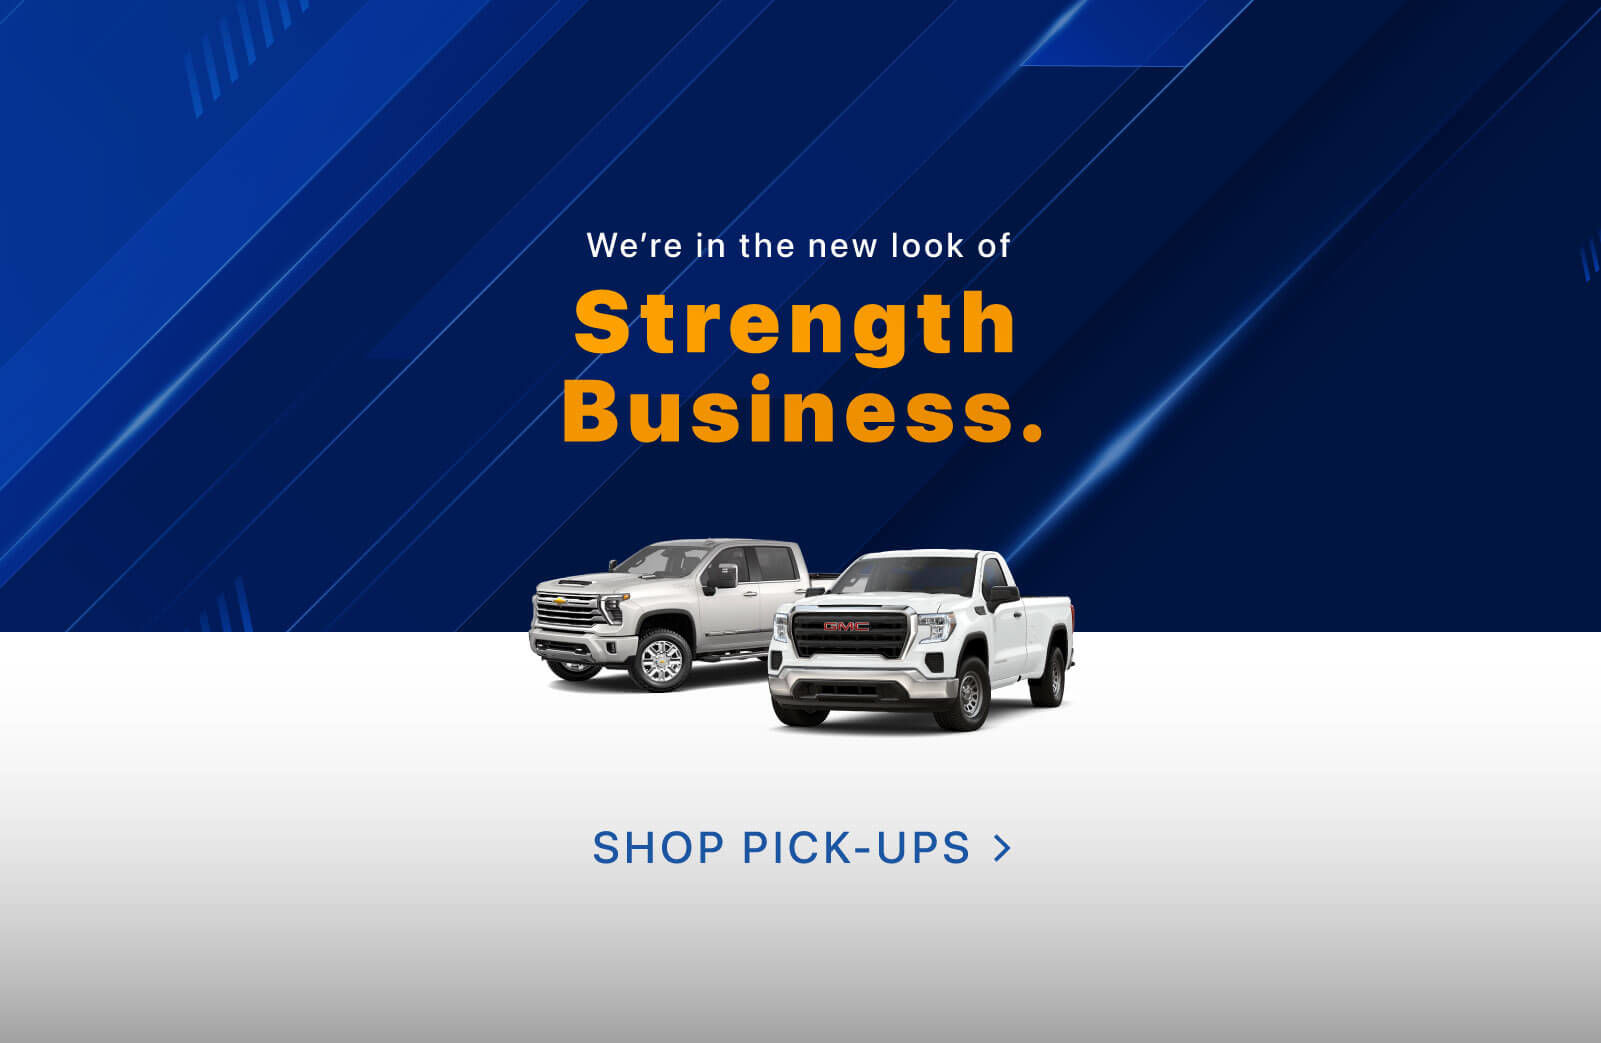 We're in the new look of Strength Business